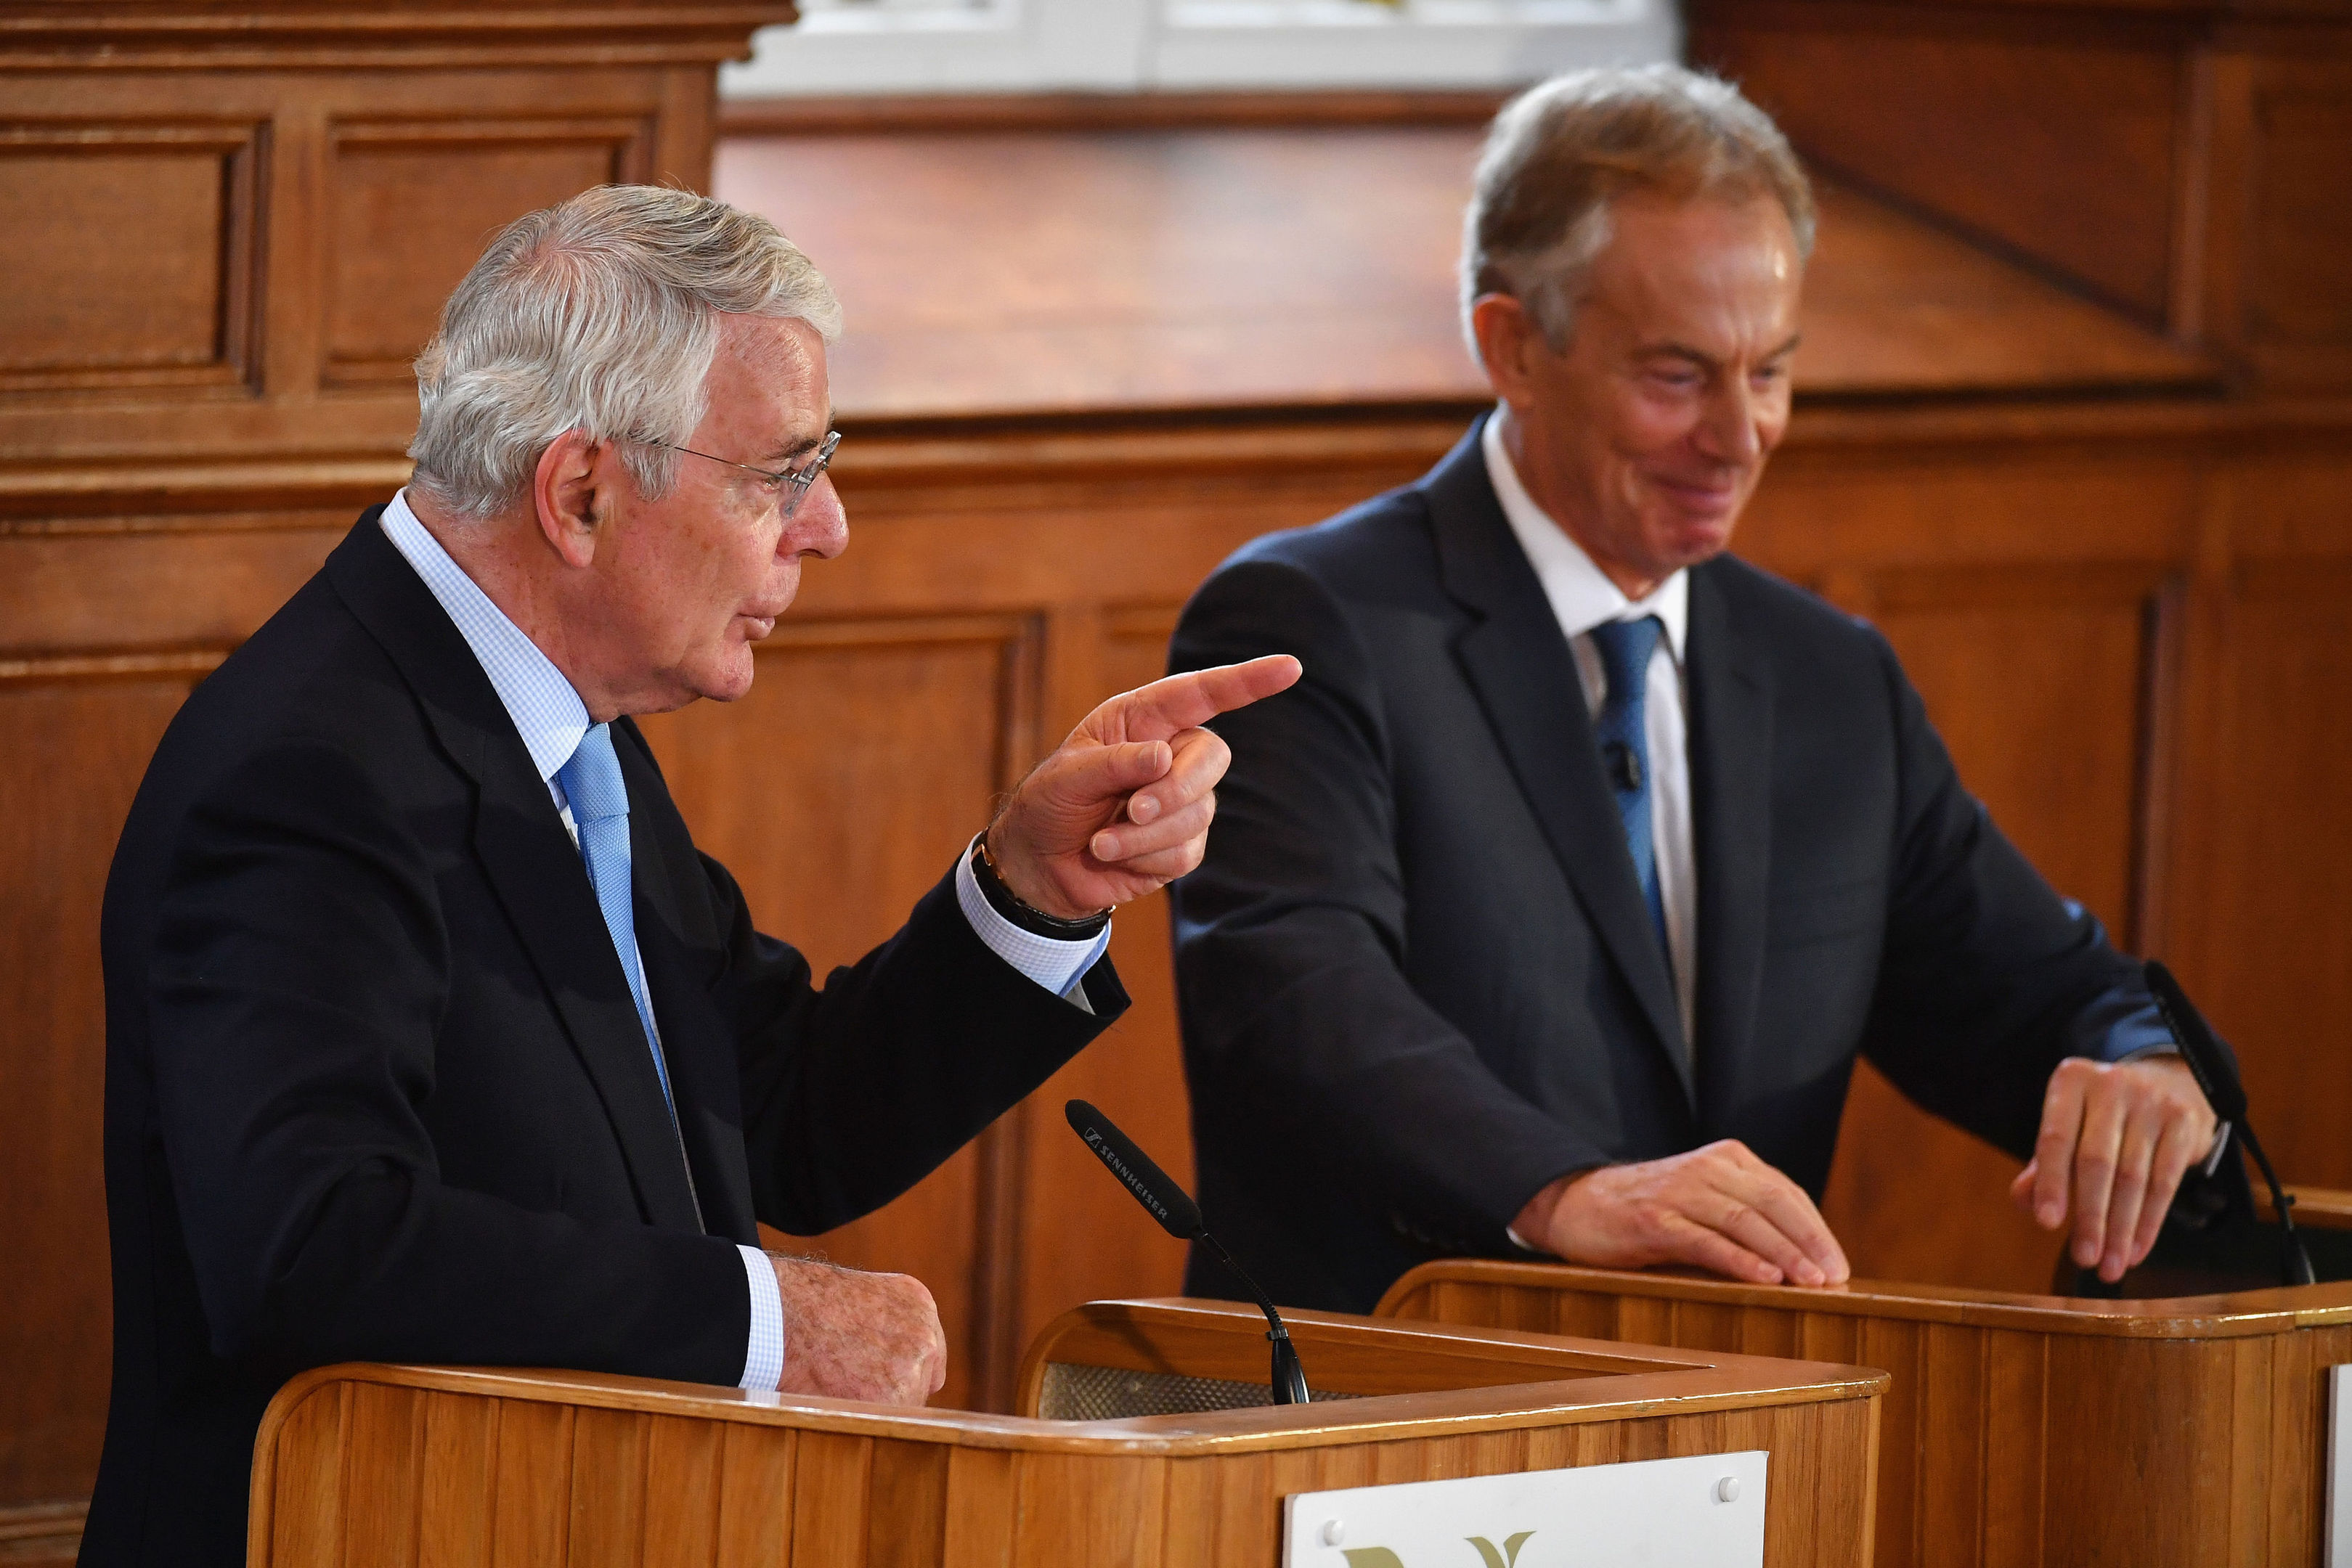 Former prime ministers Sir John Major and Tony Blair share a platform for the Remain campaign event at the University of Ulster.